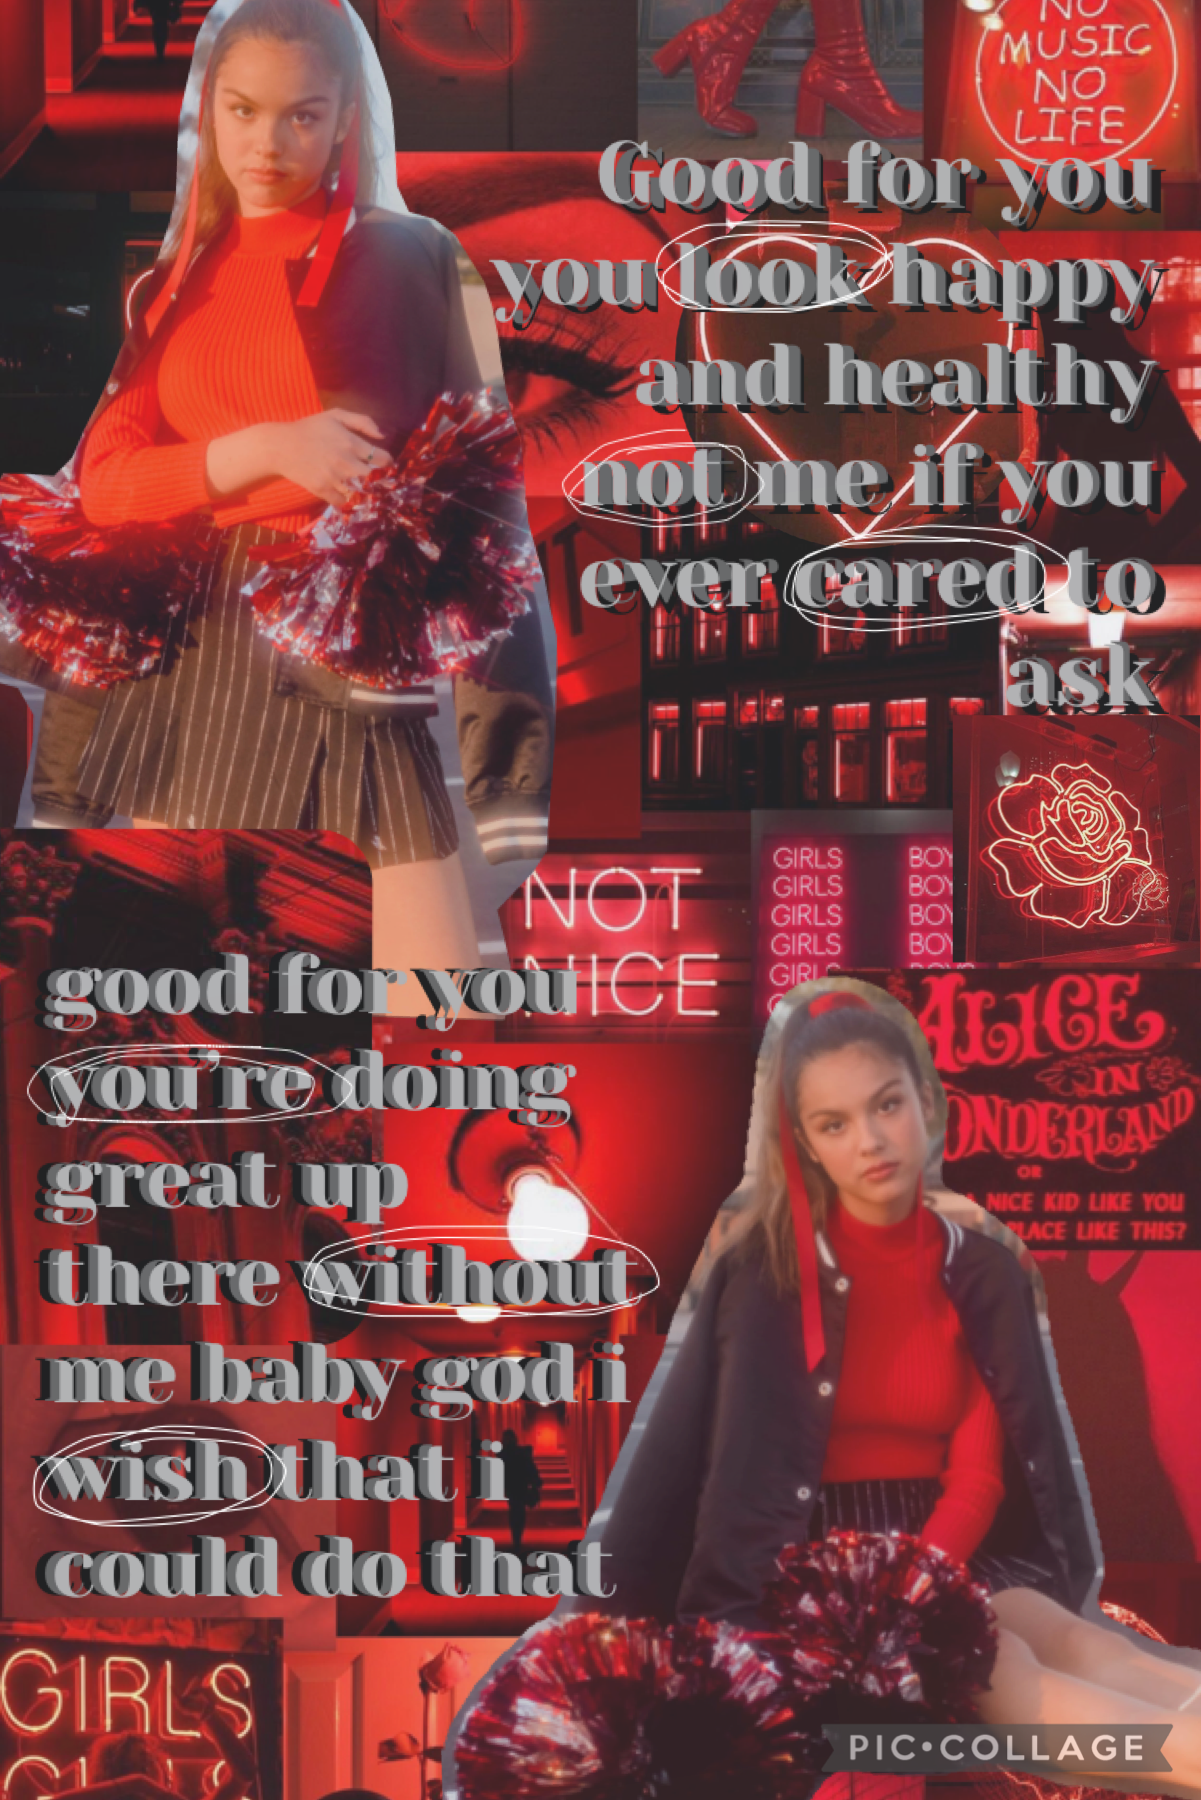 tap🌪🖤❤️

i’m in love with olivias new songggg! ik this collage is kinda a mess lol but whatever
qotd- good 4 u, deja vu or driver’s license?
aotd- it’s soooo hard to pick but i’d have to say good 4 u